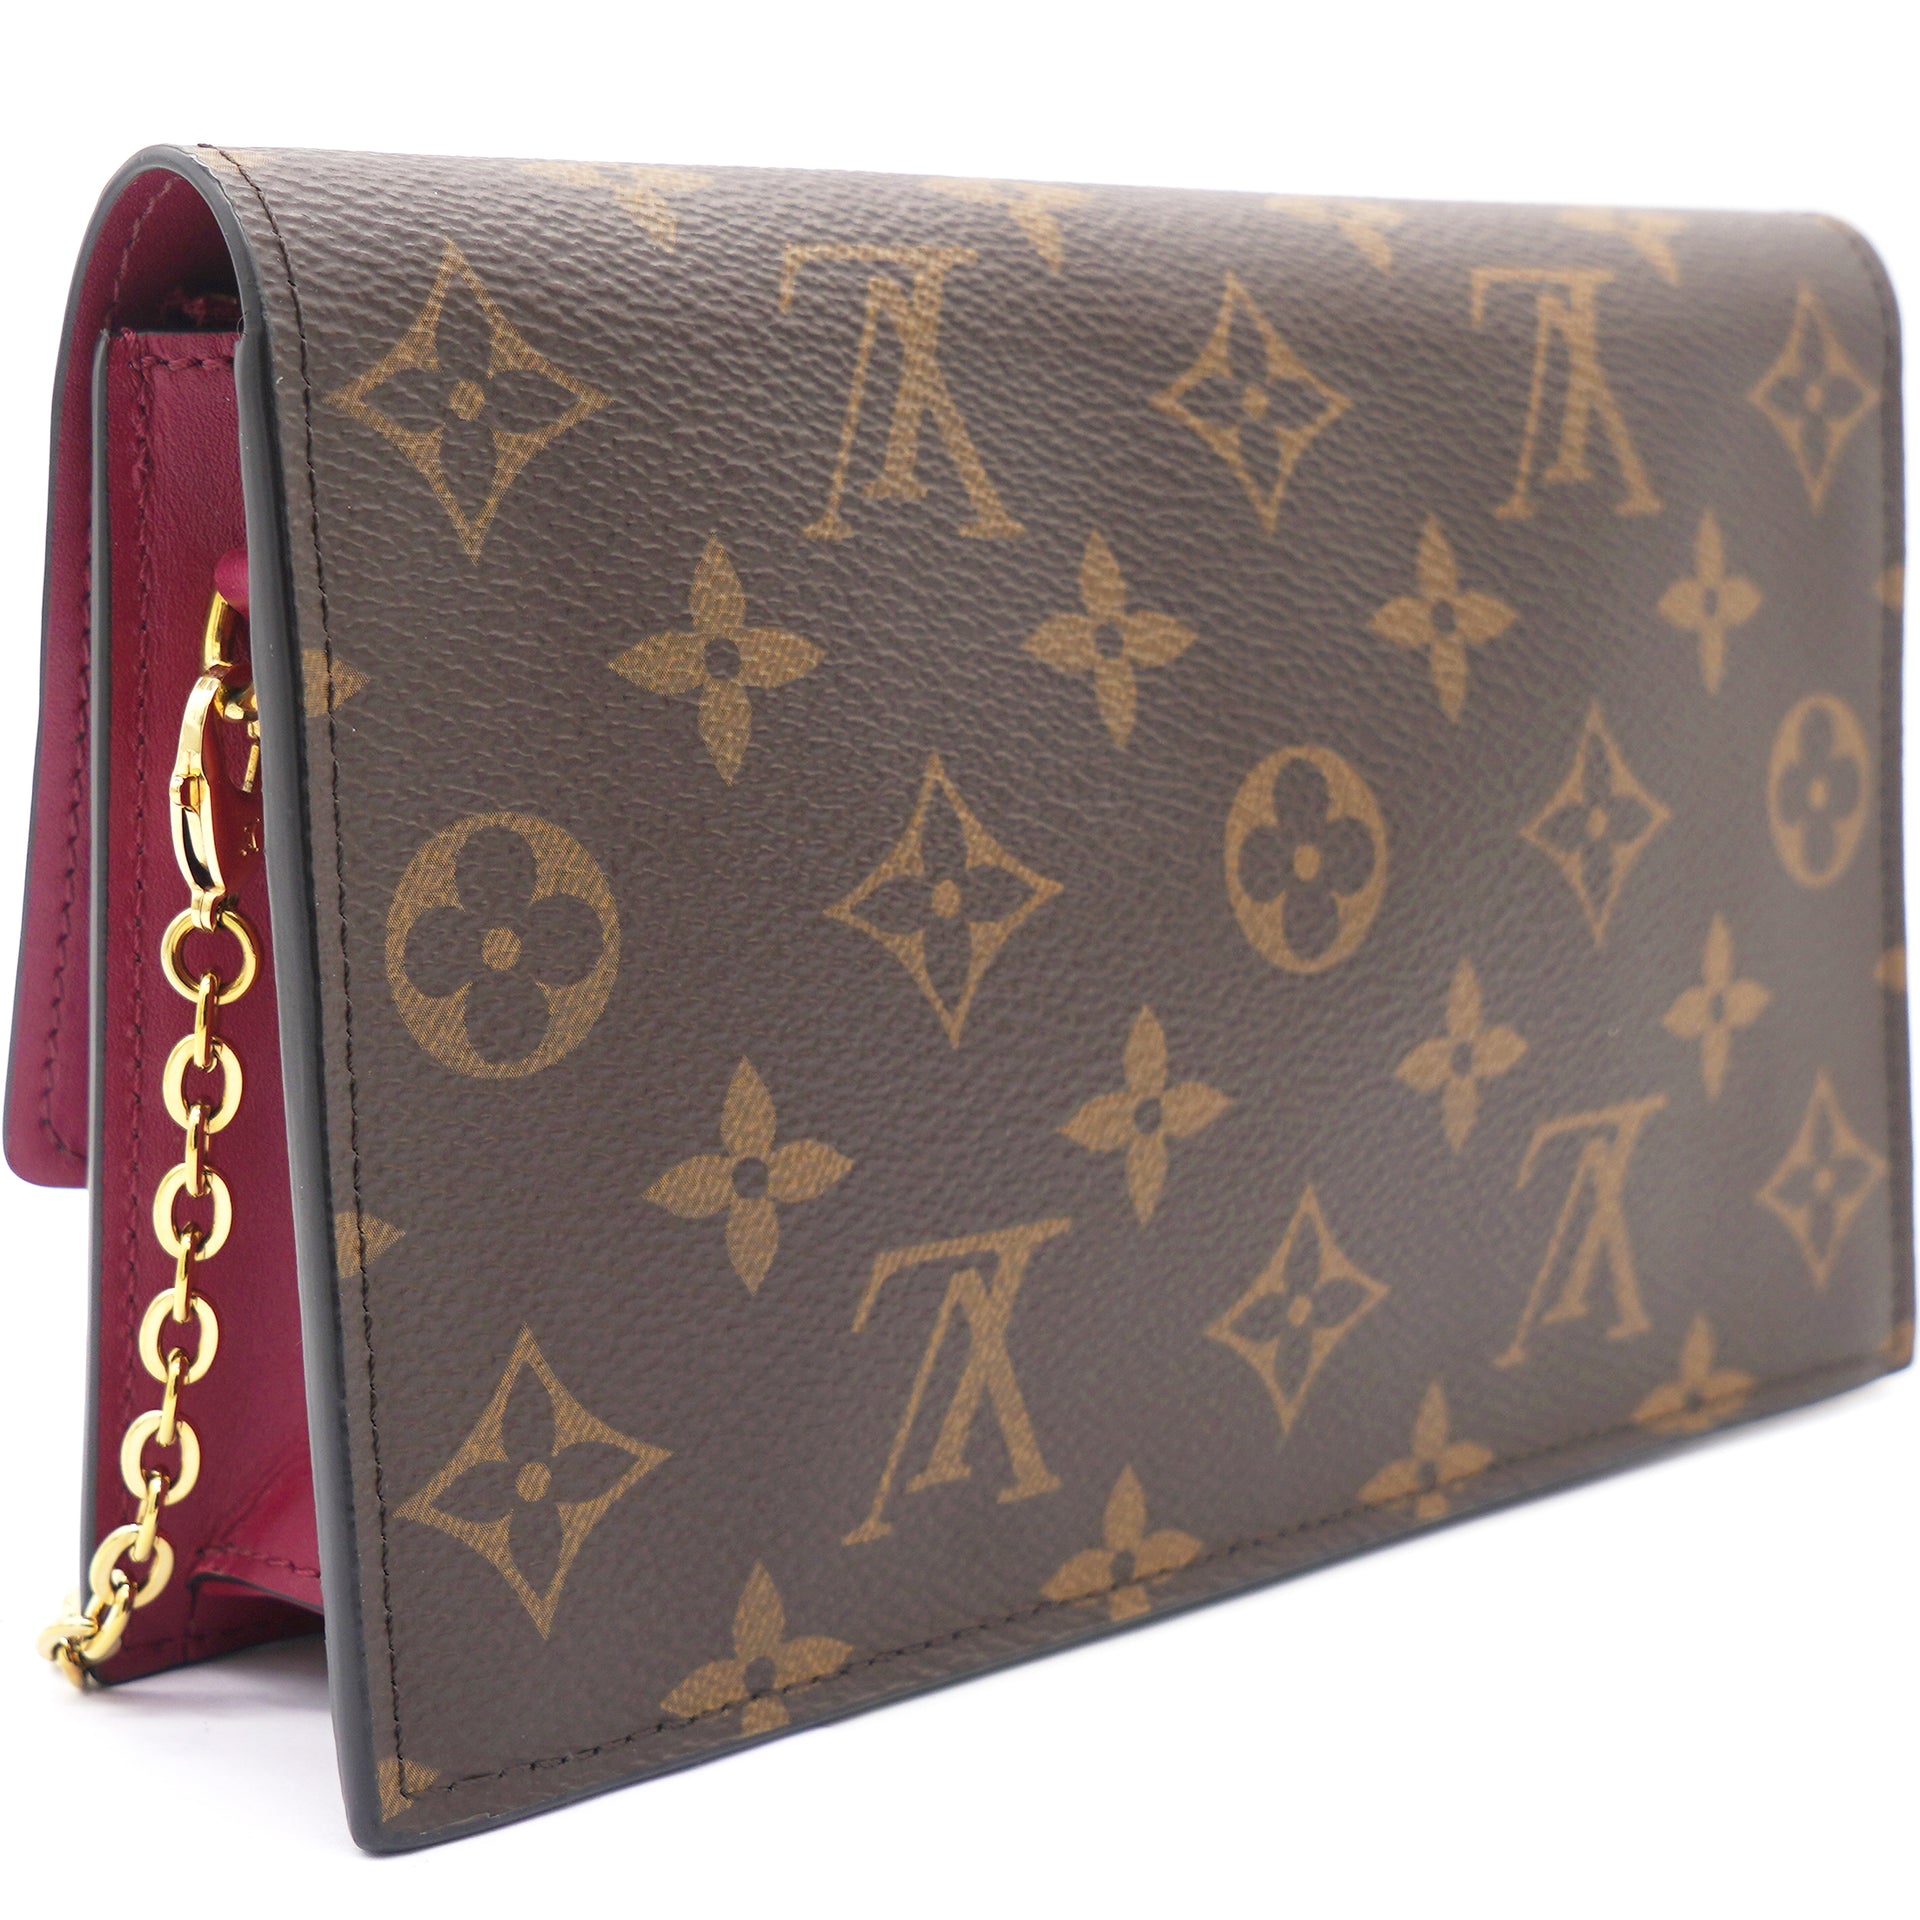 Louis Vuitton Compact Wallet Flore Monogram Fuchsia in Canvas with